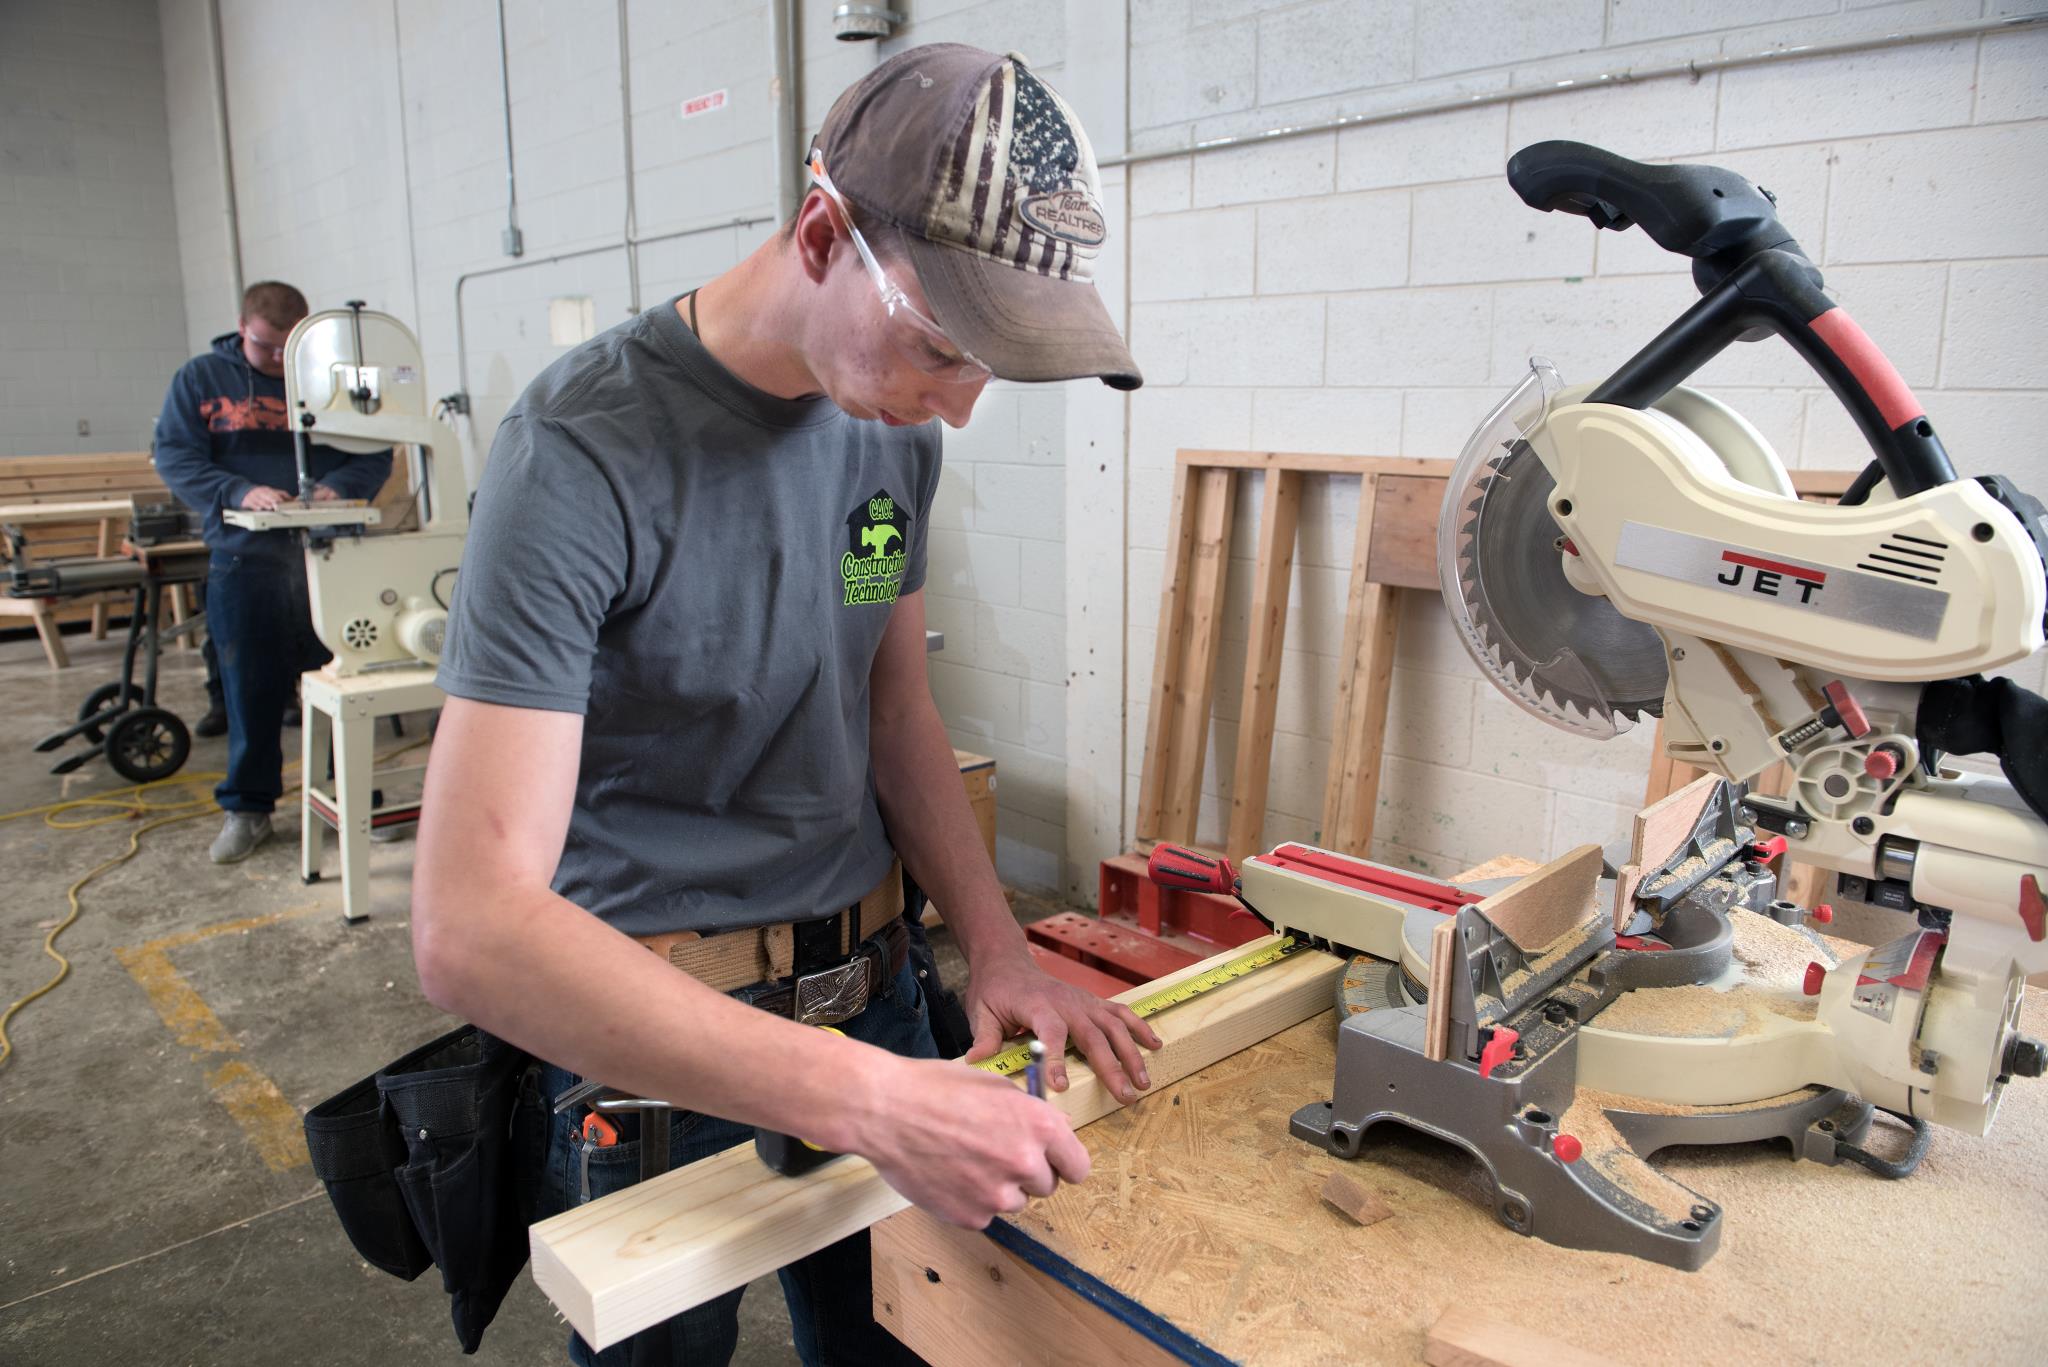 Male Construction student uses a saw to cut a piece of wood